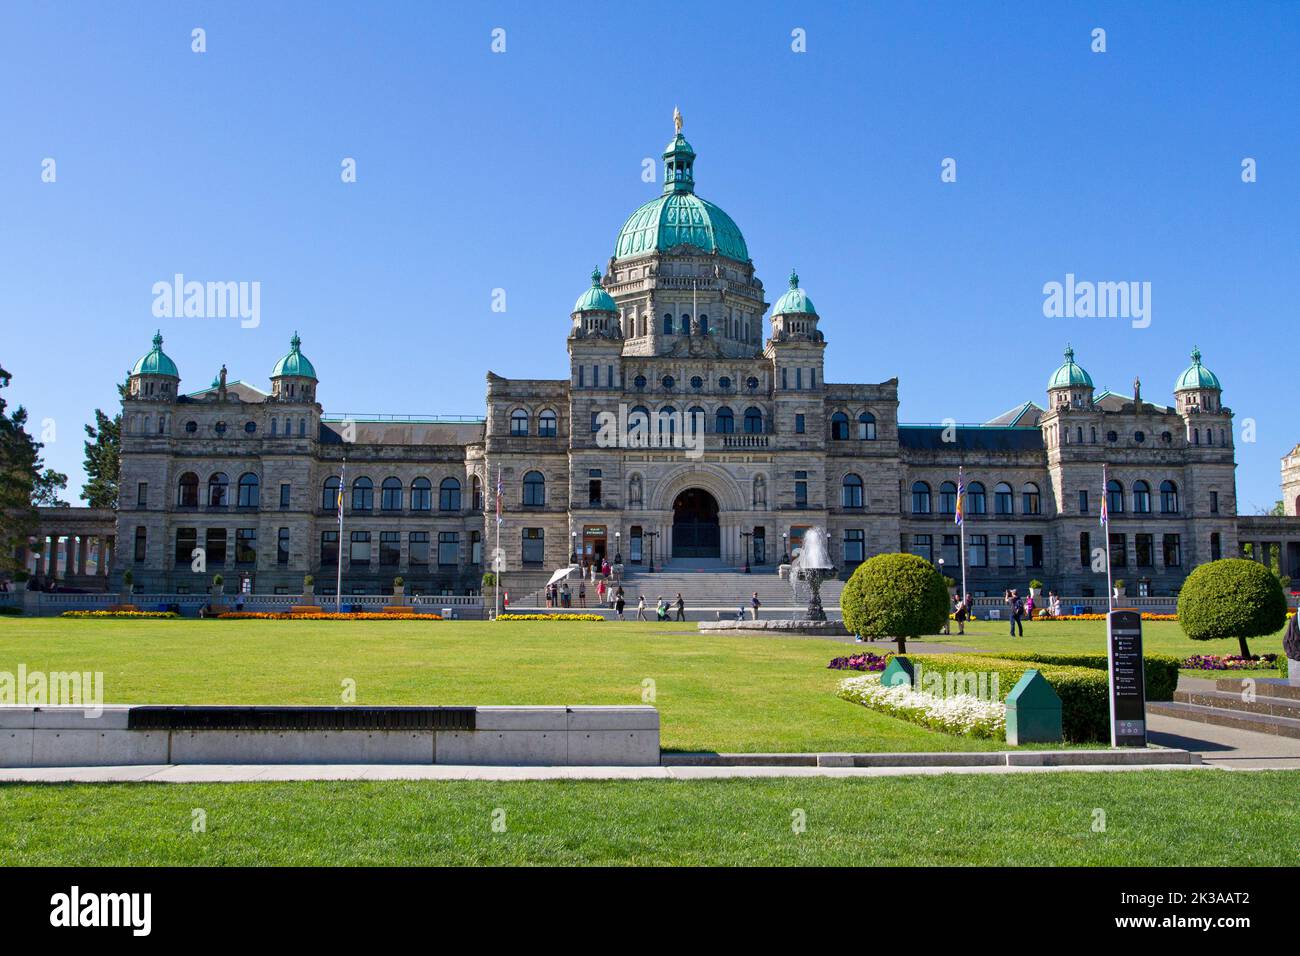 A scenic view of the British Columbia Parliament Buildings in Victoria, British Columbia, Canada, home to the Legislative Assembly of British Columbia Stock Photo